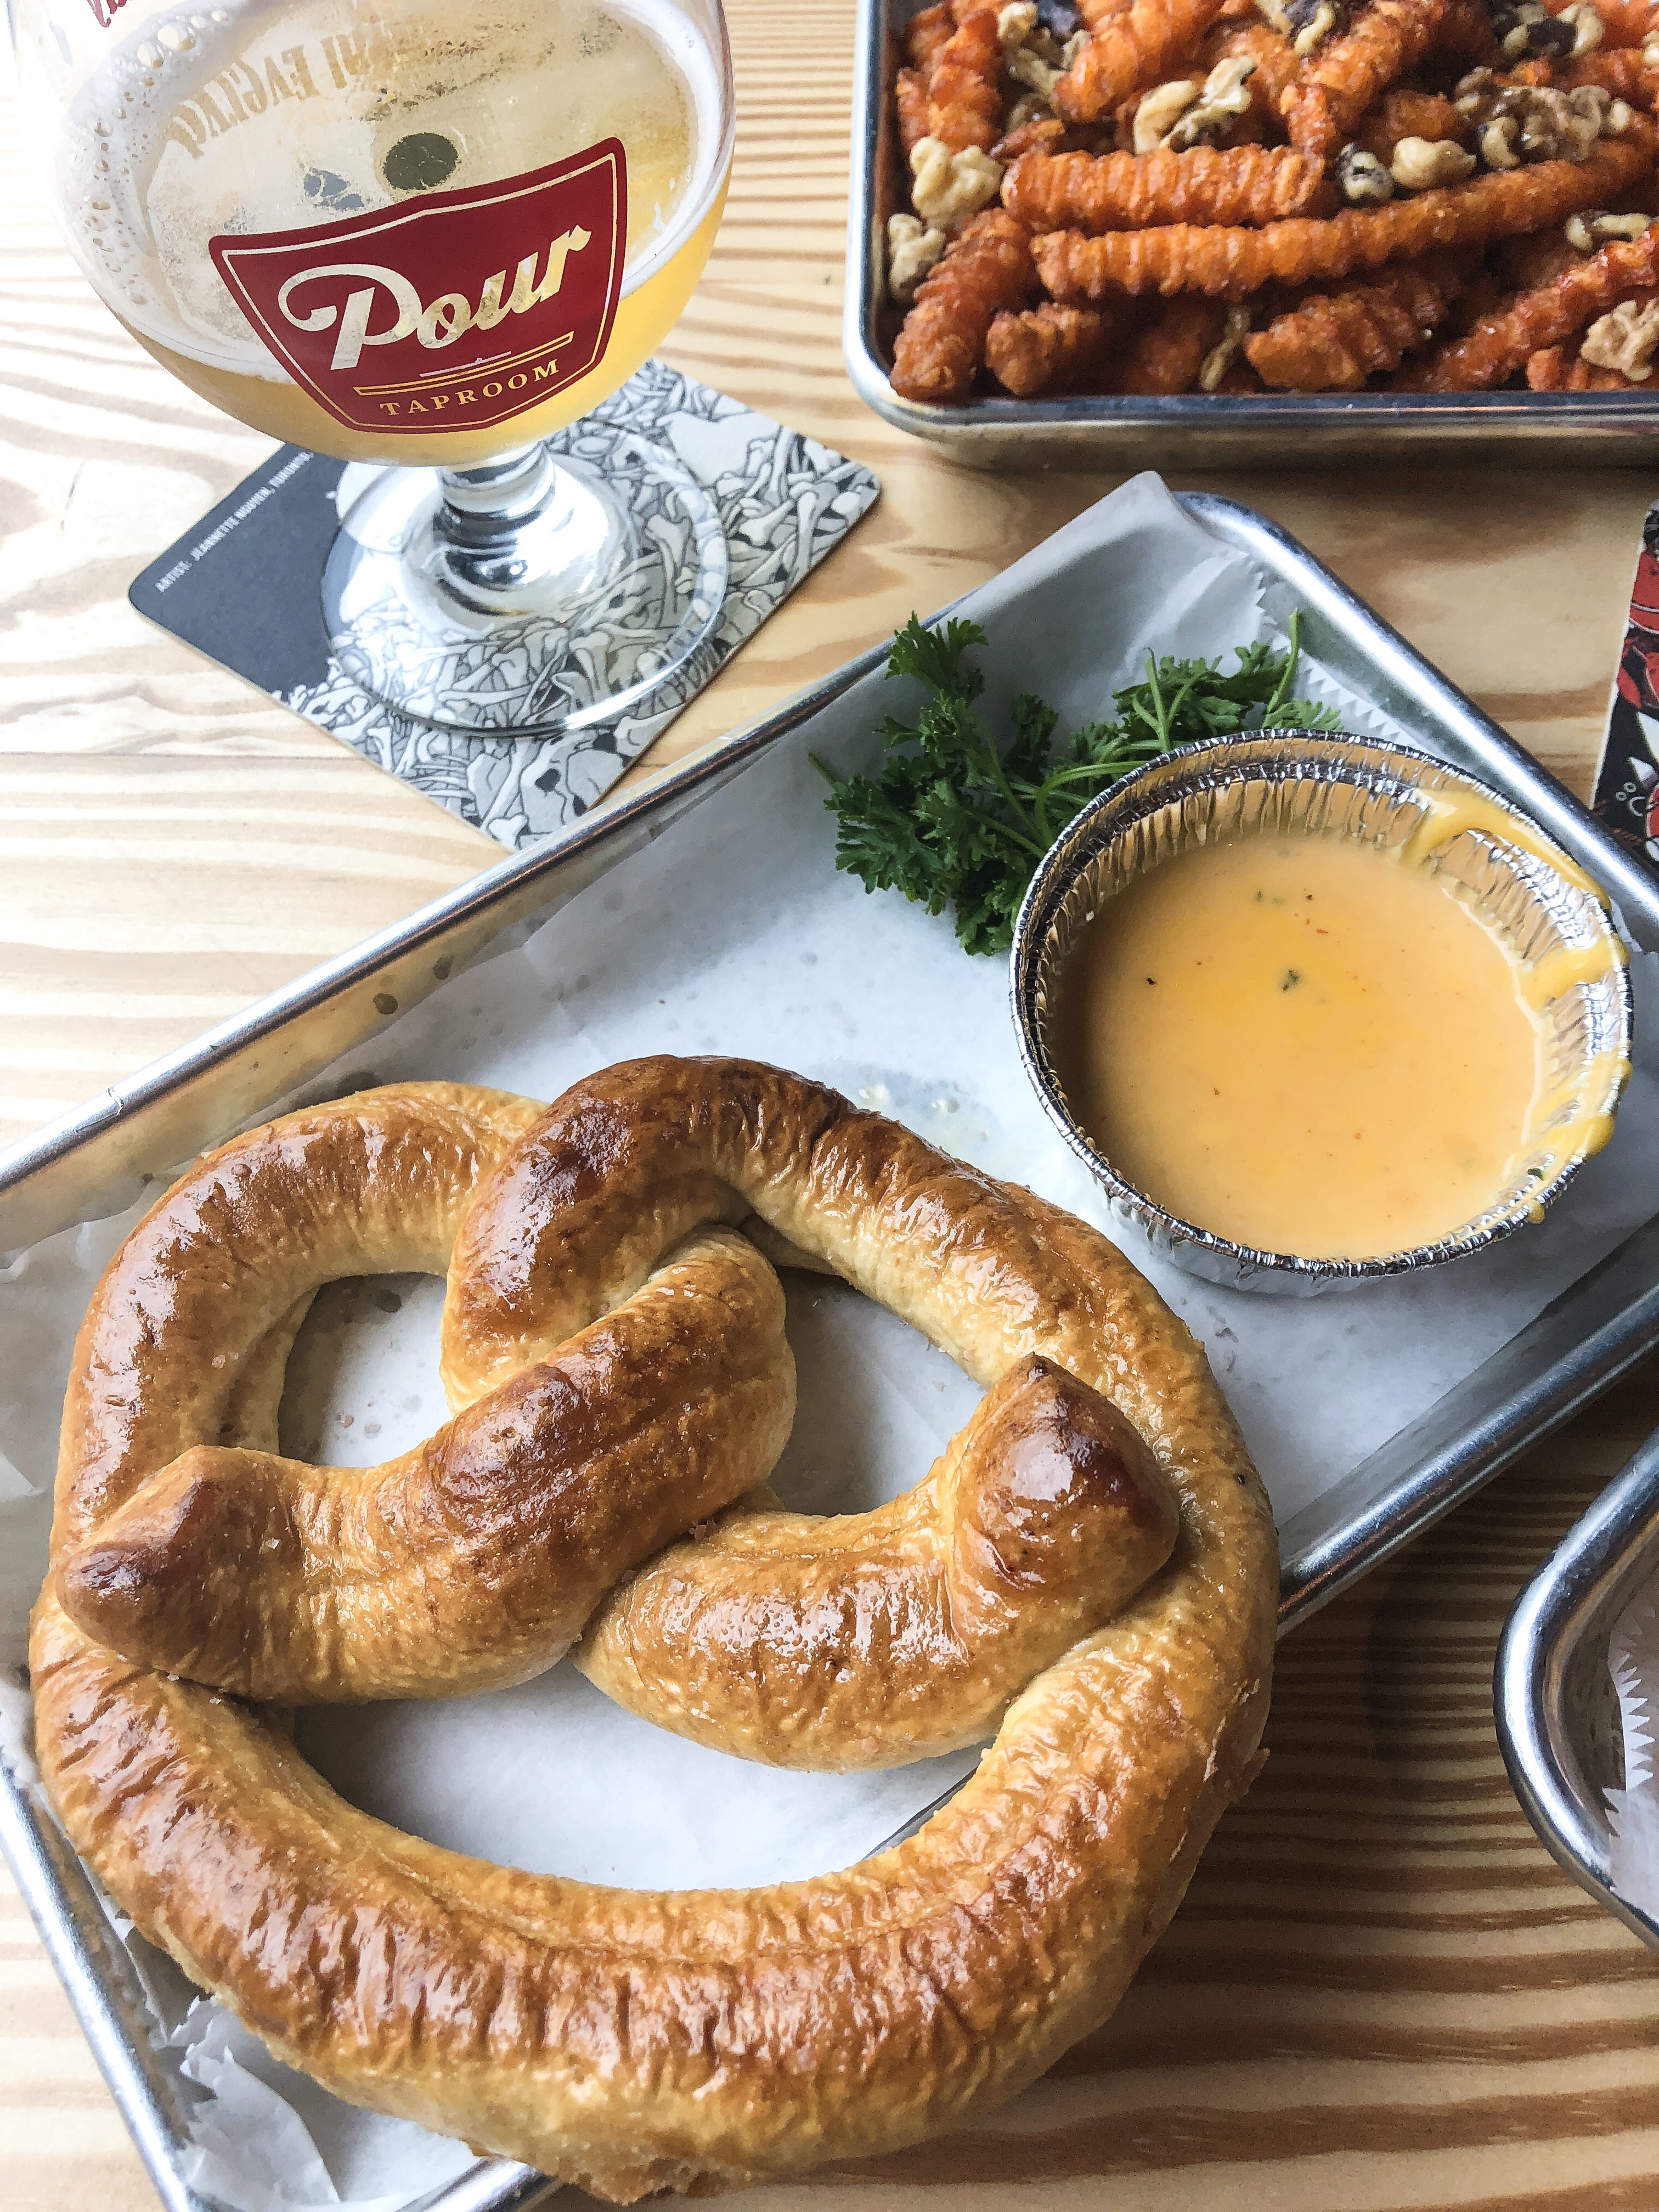 Pretzel and beer cheese with beer pairing